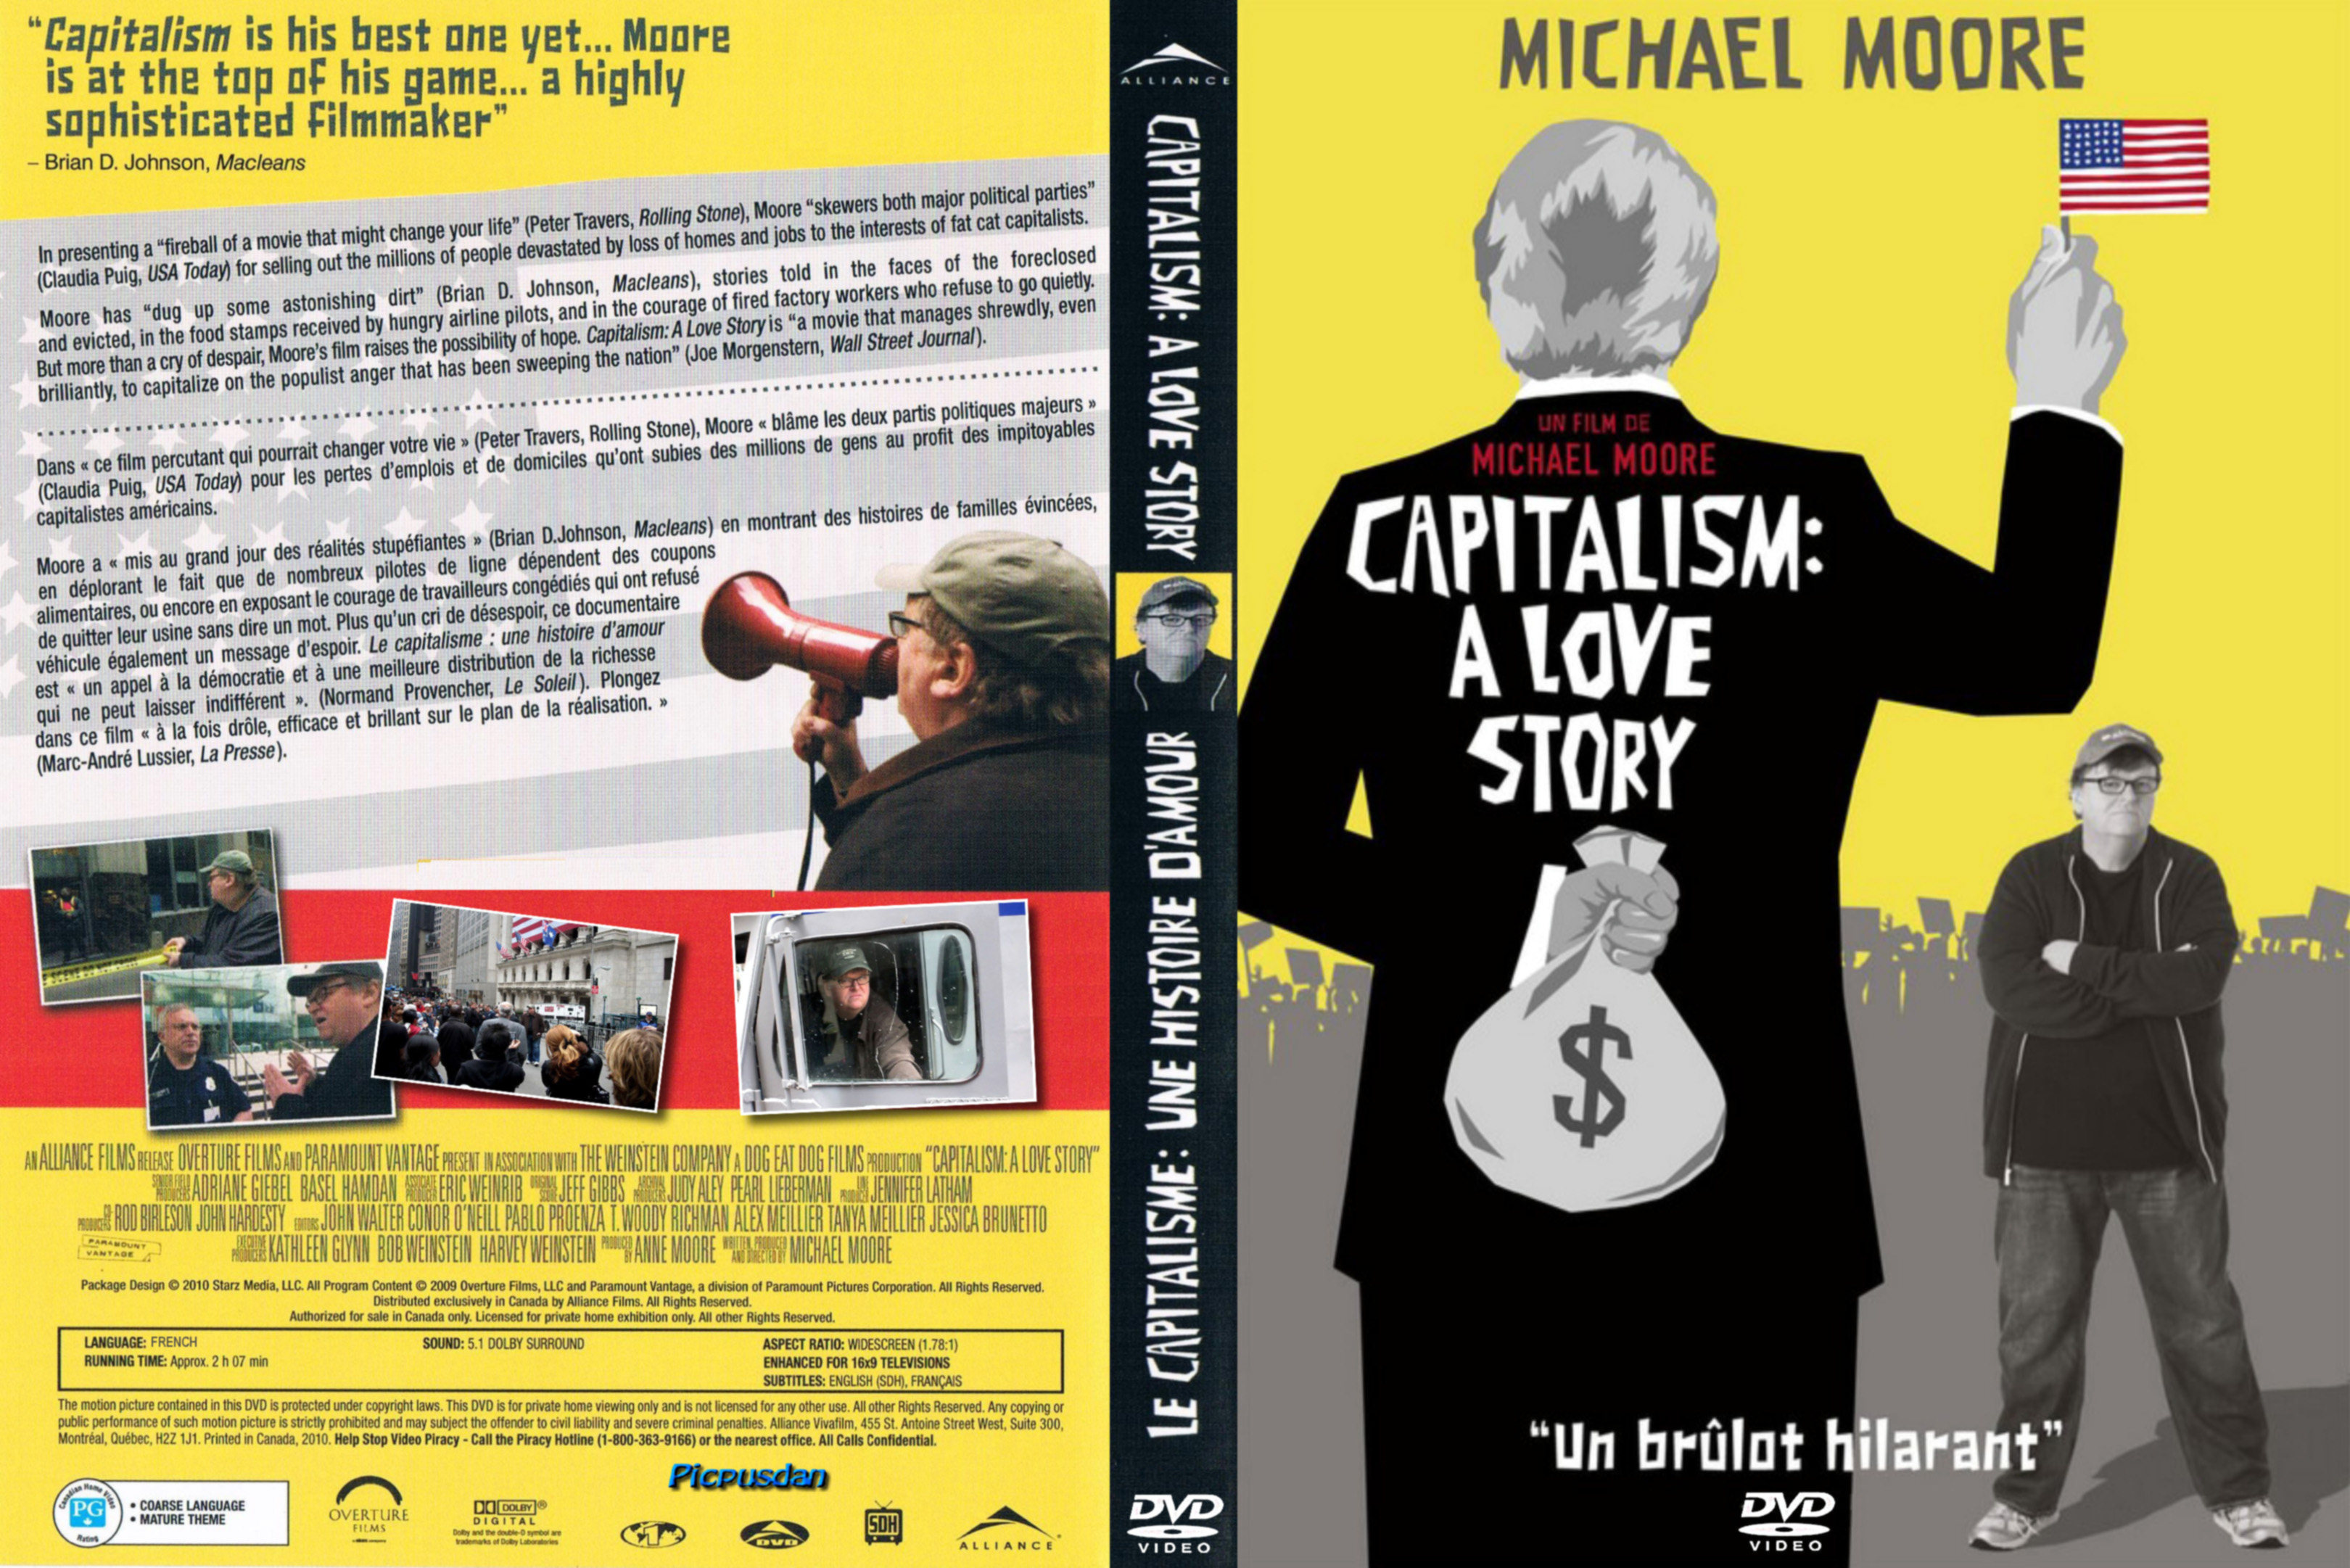 Jaquette DVD Capitalism a love story (Canadienne)